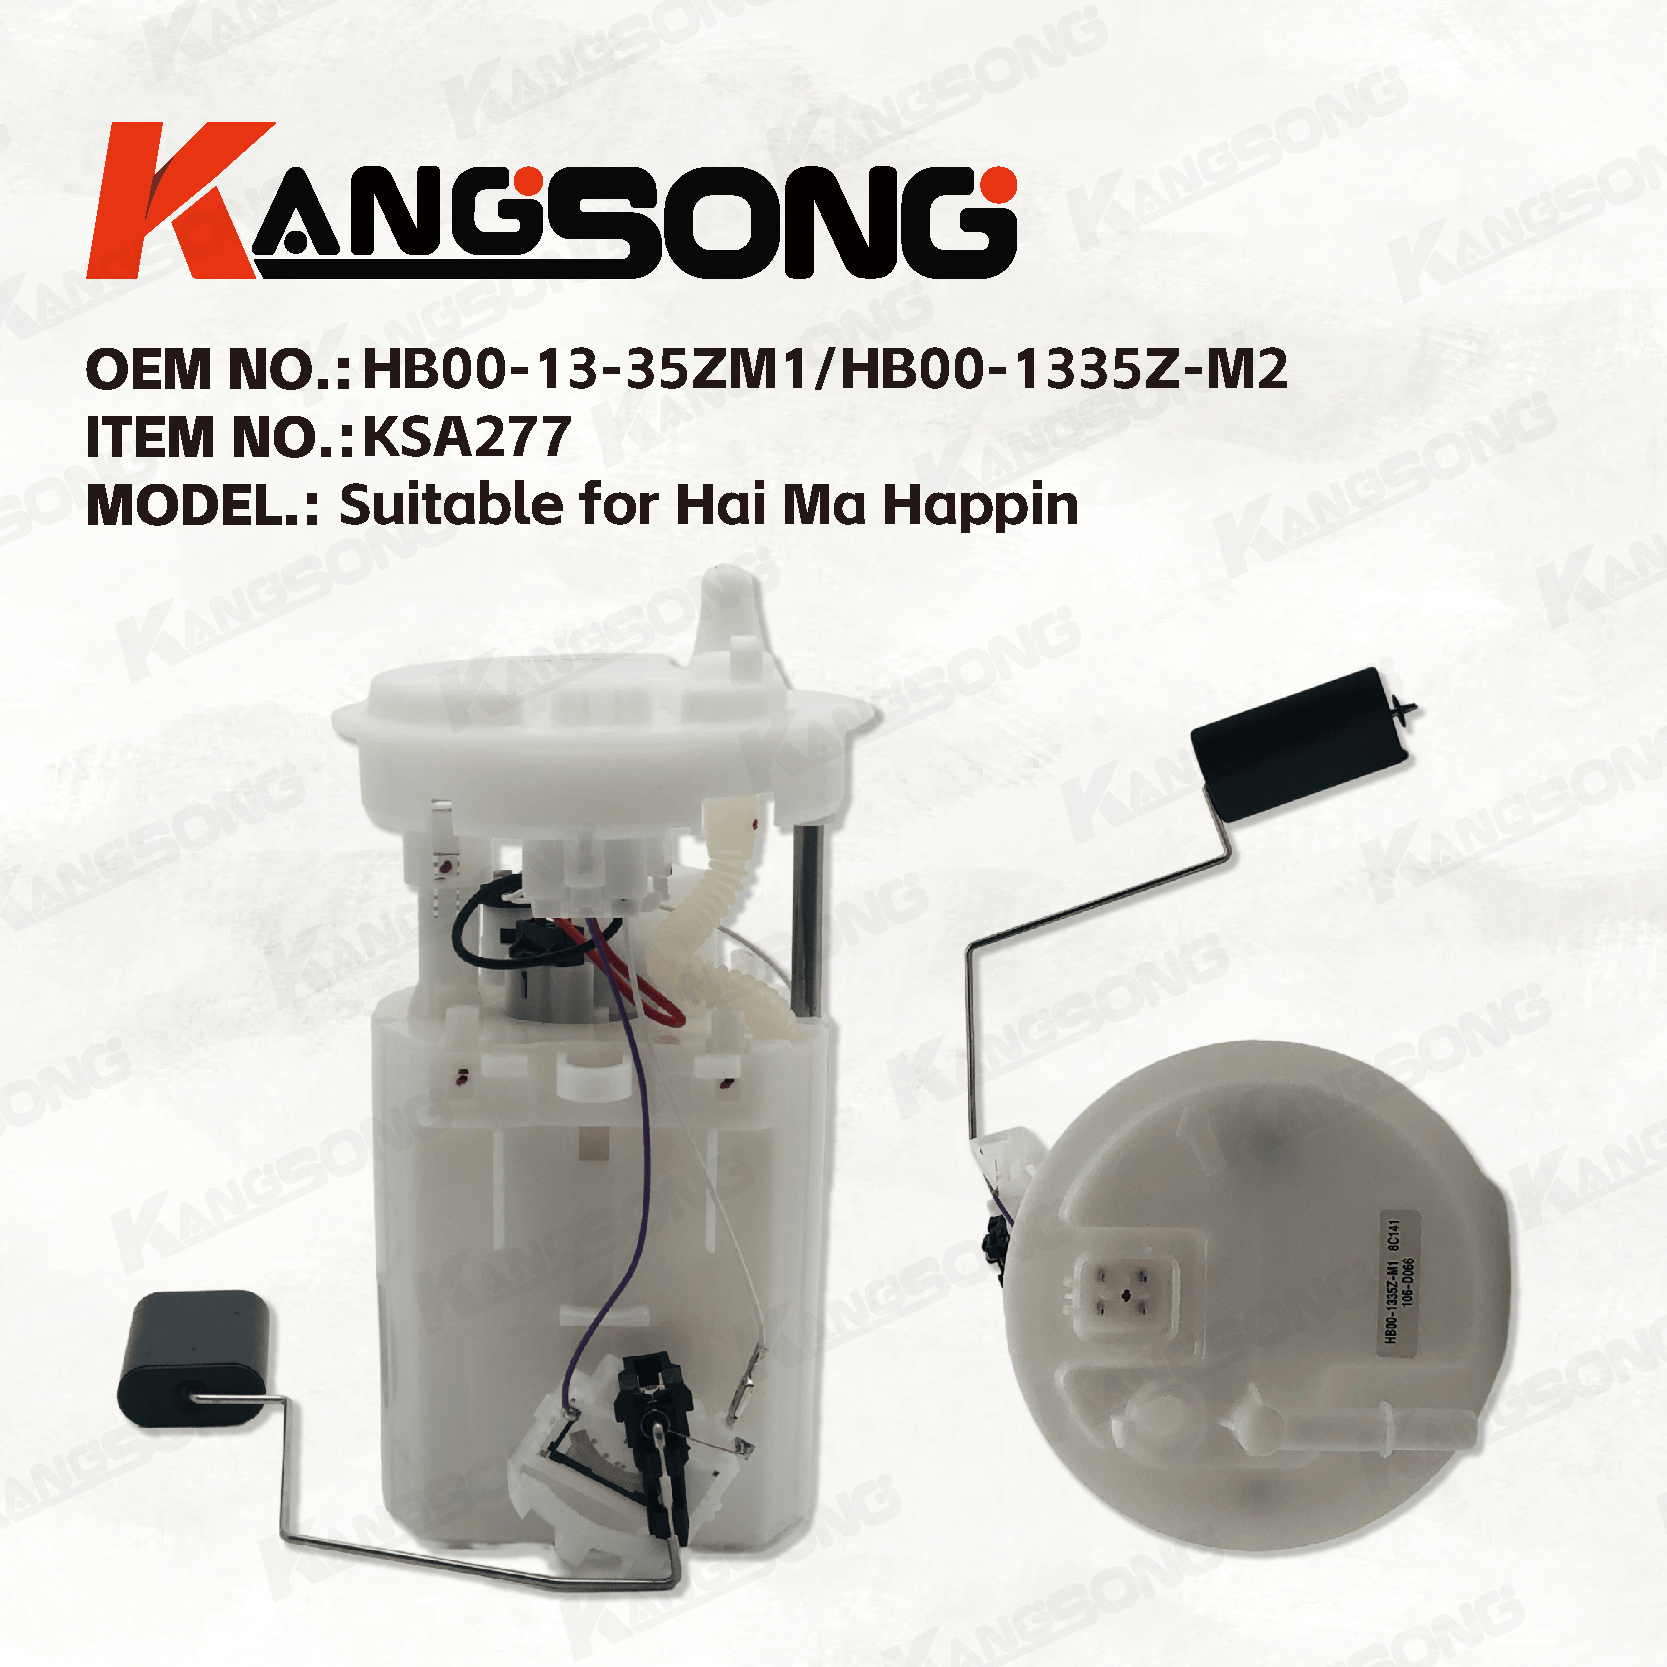 High performance electric engine fuel pump/HB00-1335Z-M1 HB00-13-35ZF HB00-13-35ZM1 HB00-1335Z-M2 /Fuel Pump Module Assembly for Hai Ma Family